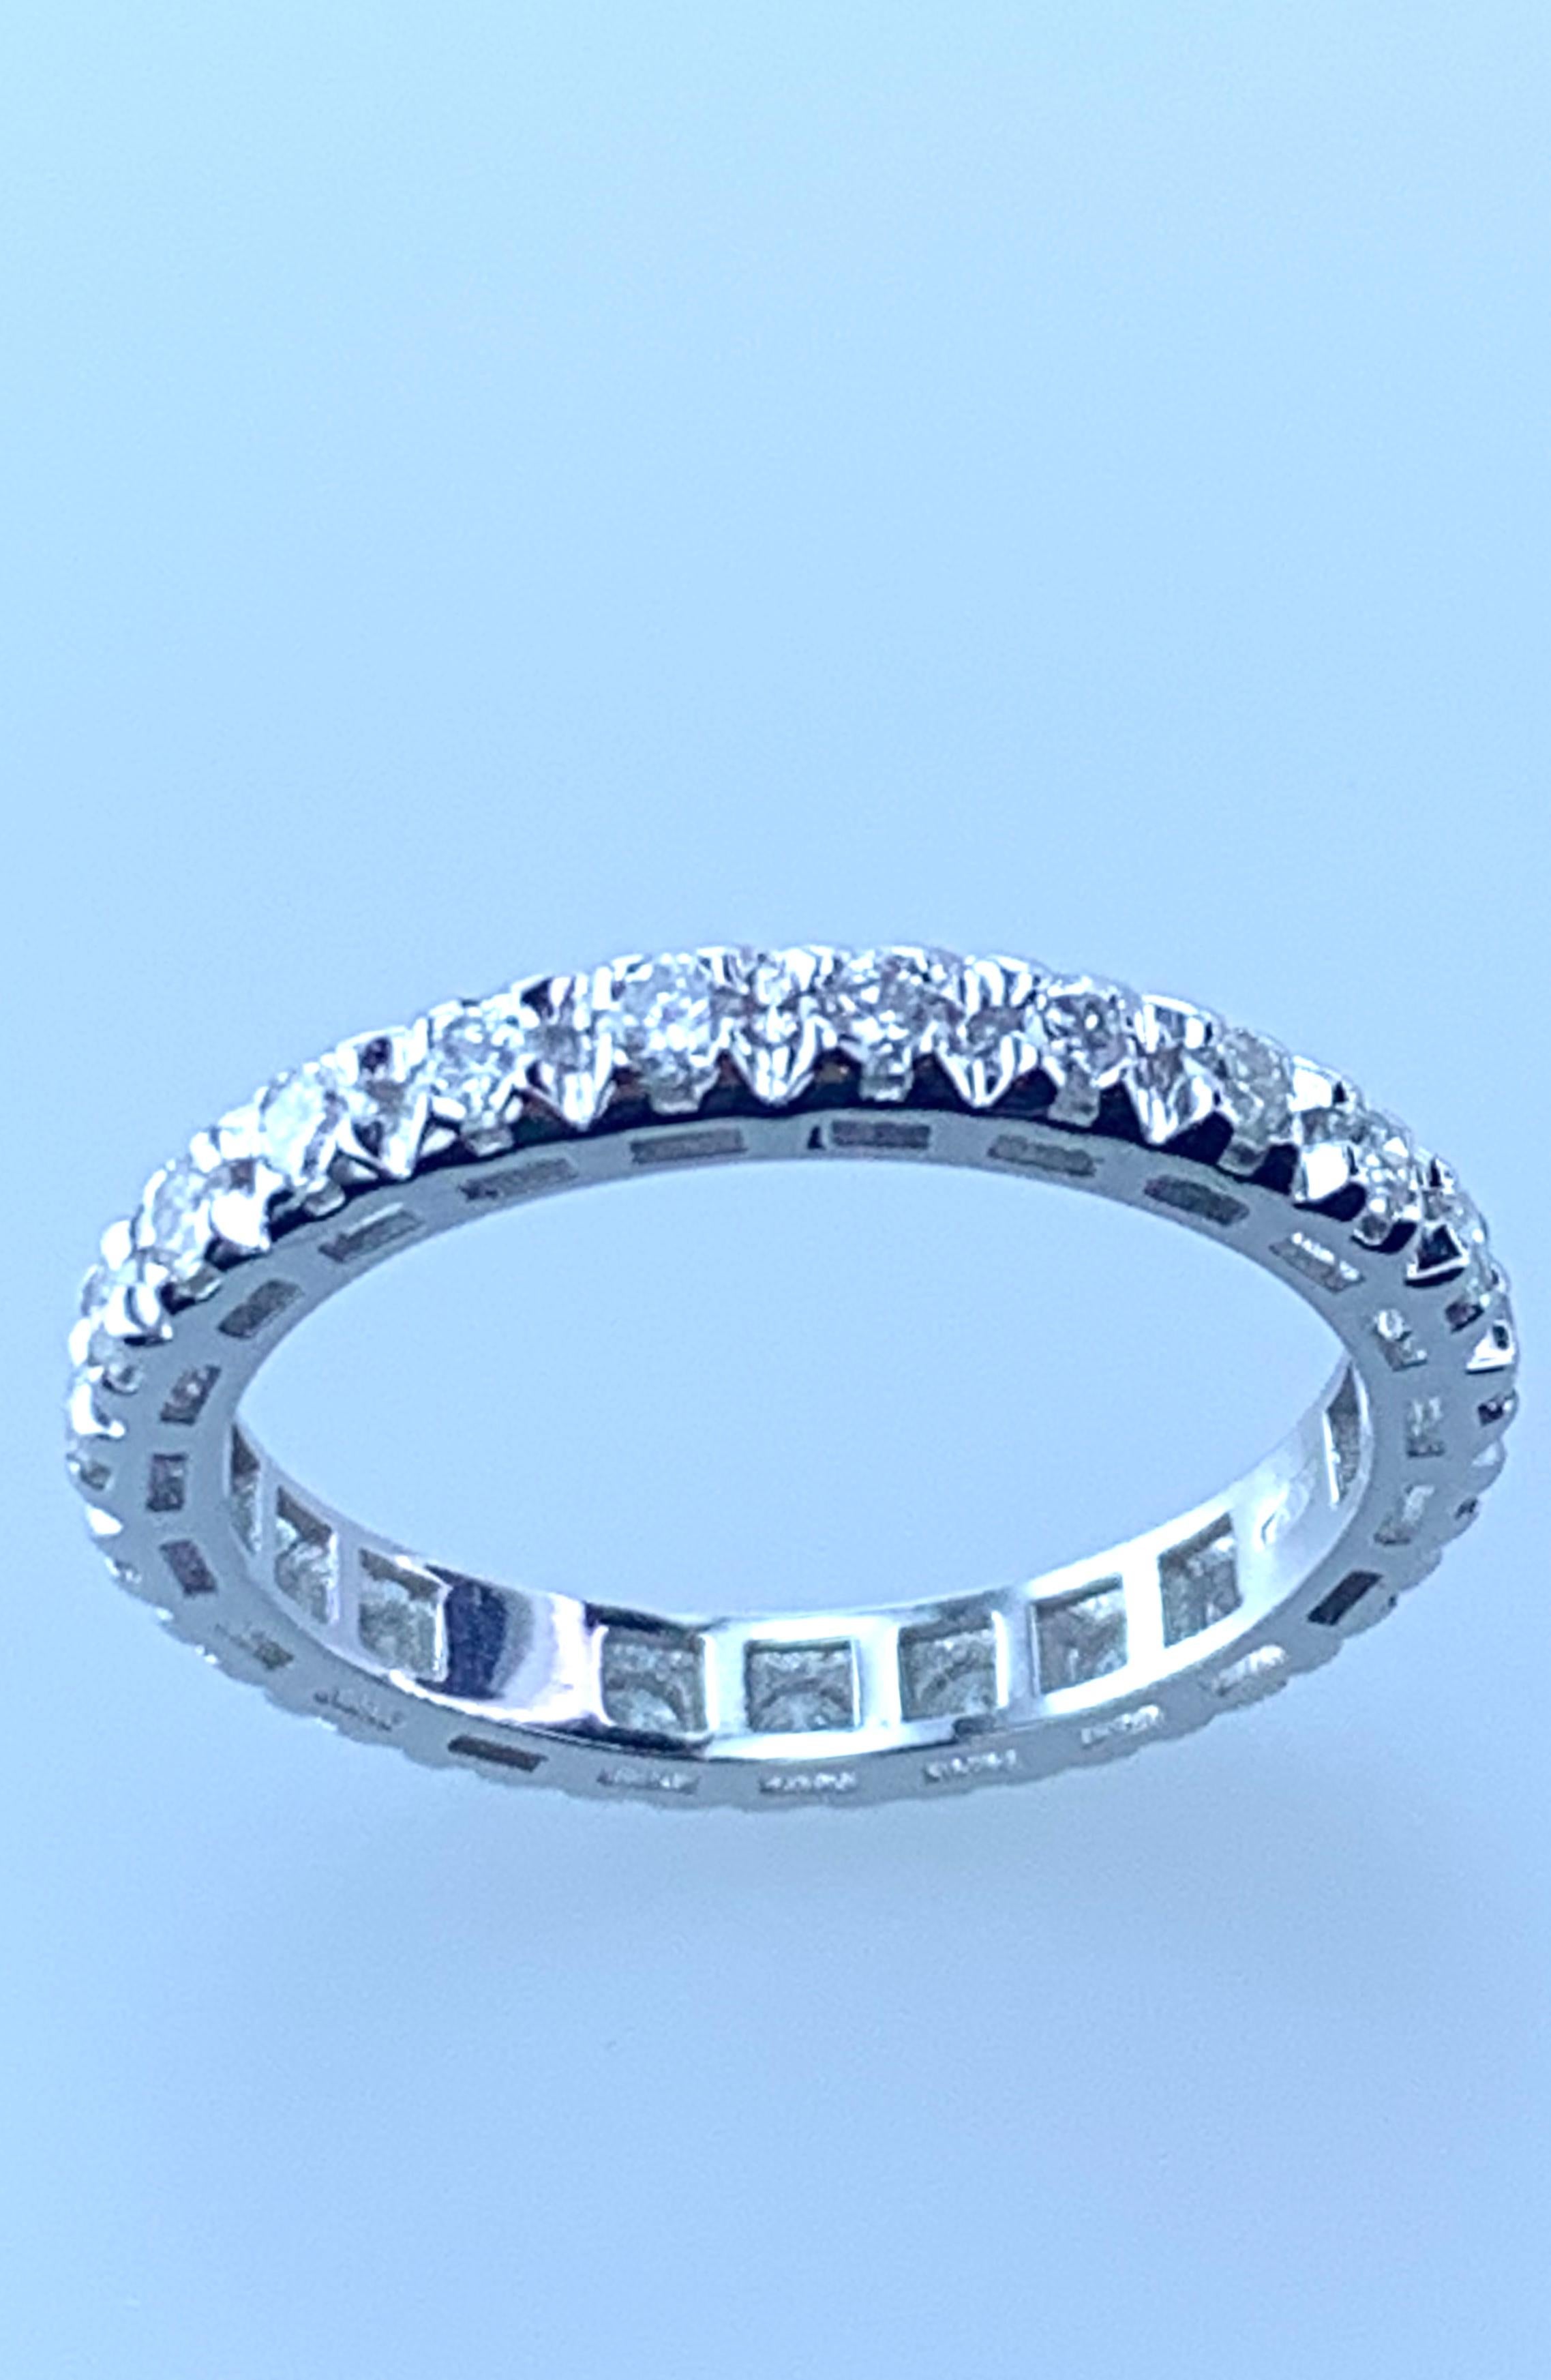 This Certified HRD 0.75 Carat Diamond Eternity Ring is of a fabulous quality and size for either a man or woman. 

It sparkles beautiful natural Diamonds throughout the ring, gifting light and beauty to the finger from every angle. 

Set in 18Kt